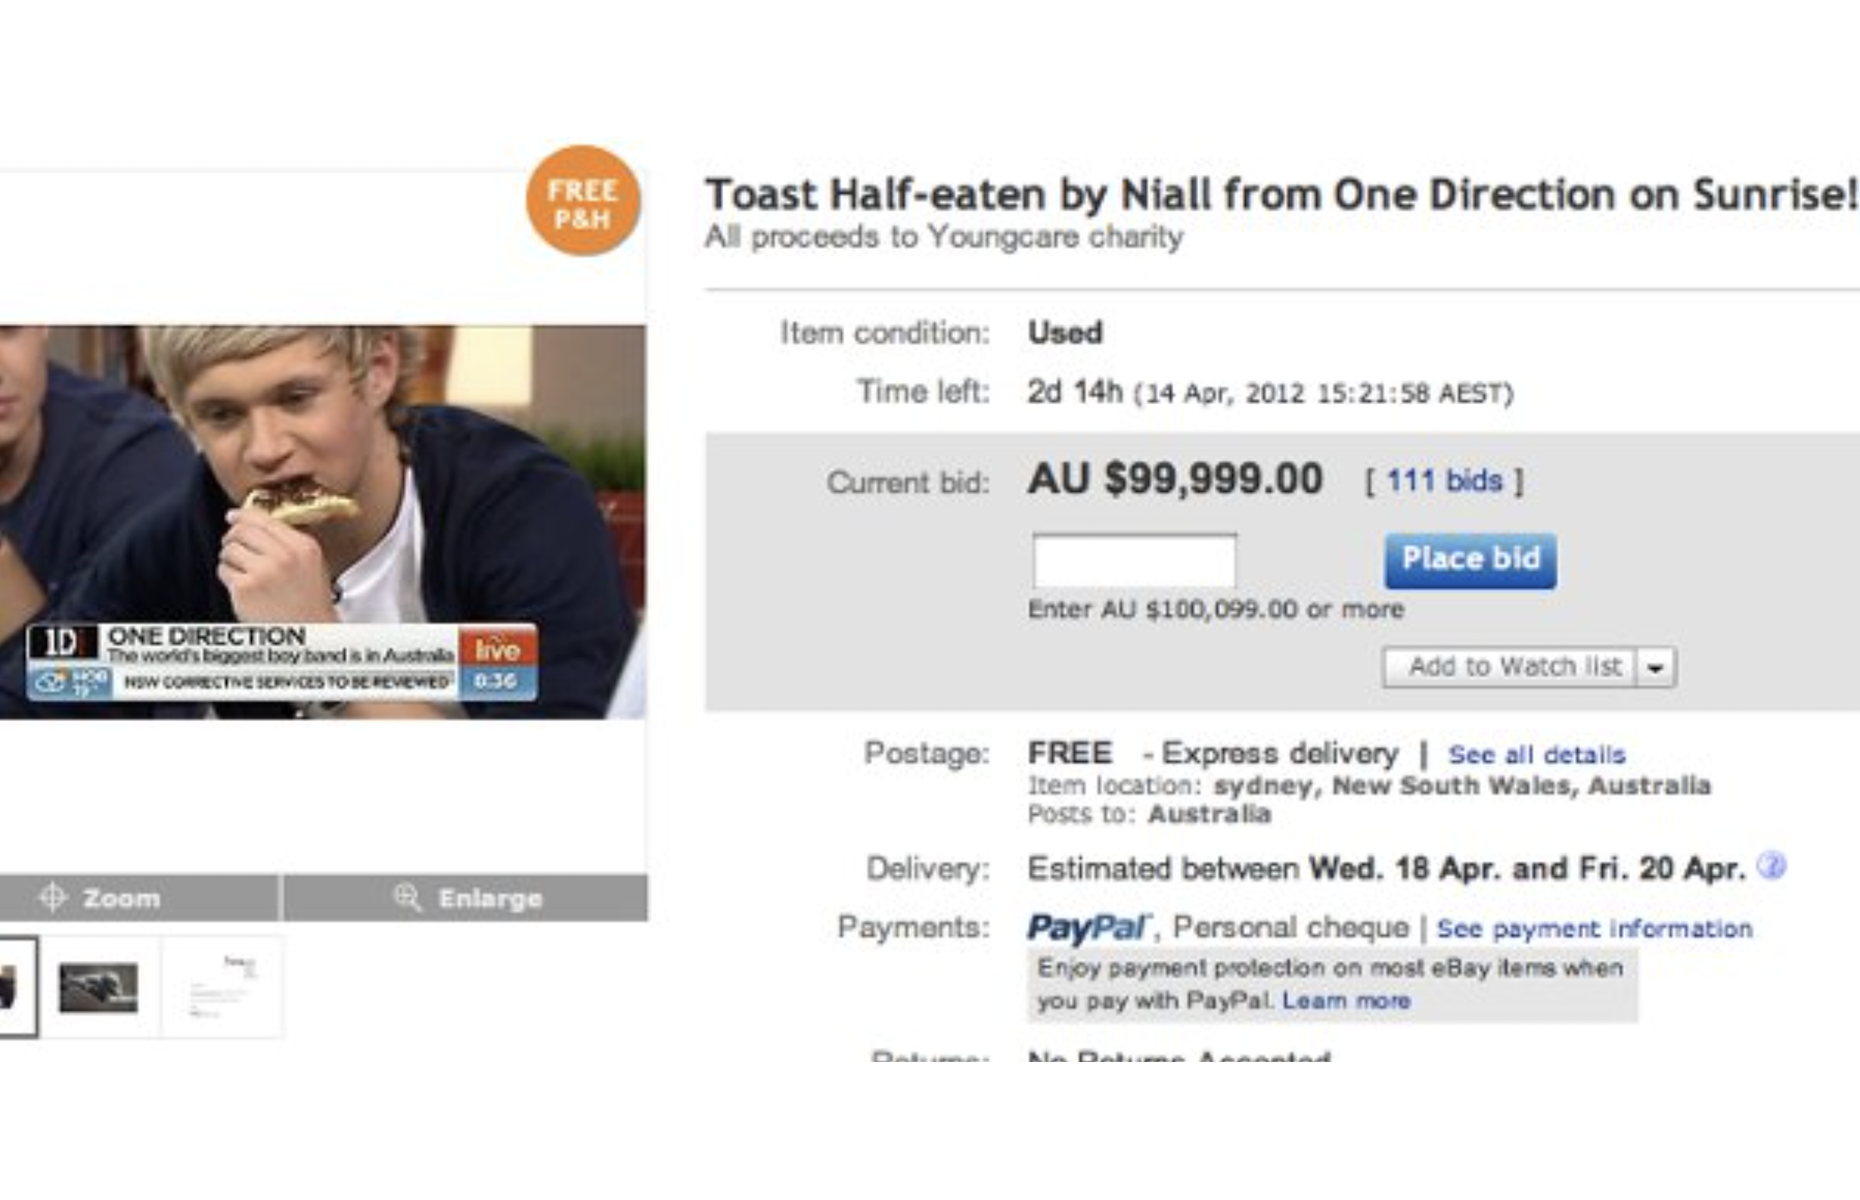 Niall Horan's chewed-up toast: $100,000 (£81.6k)